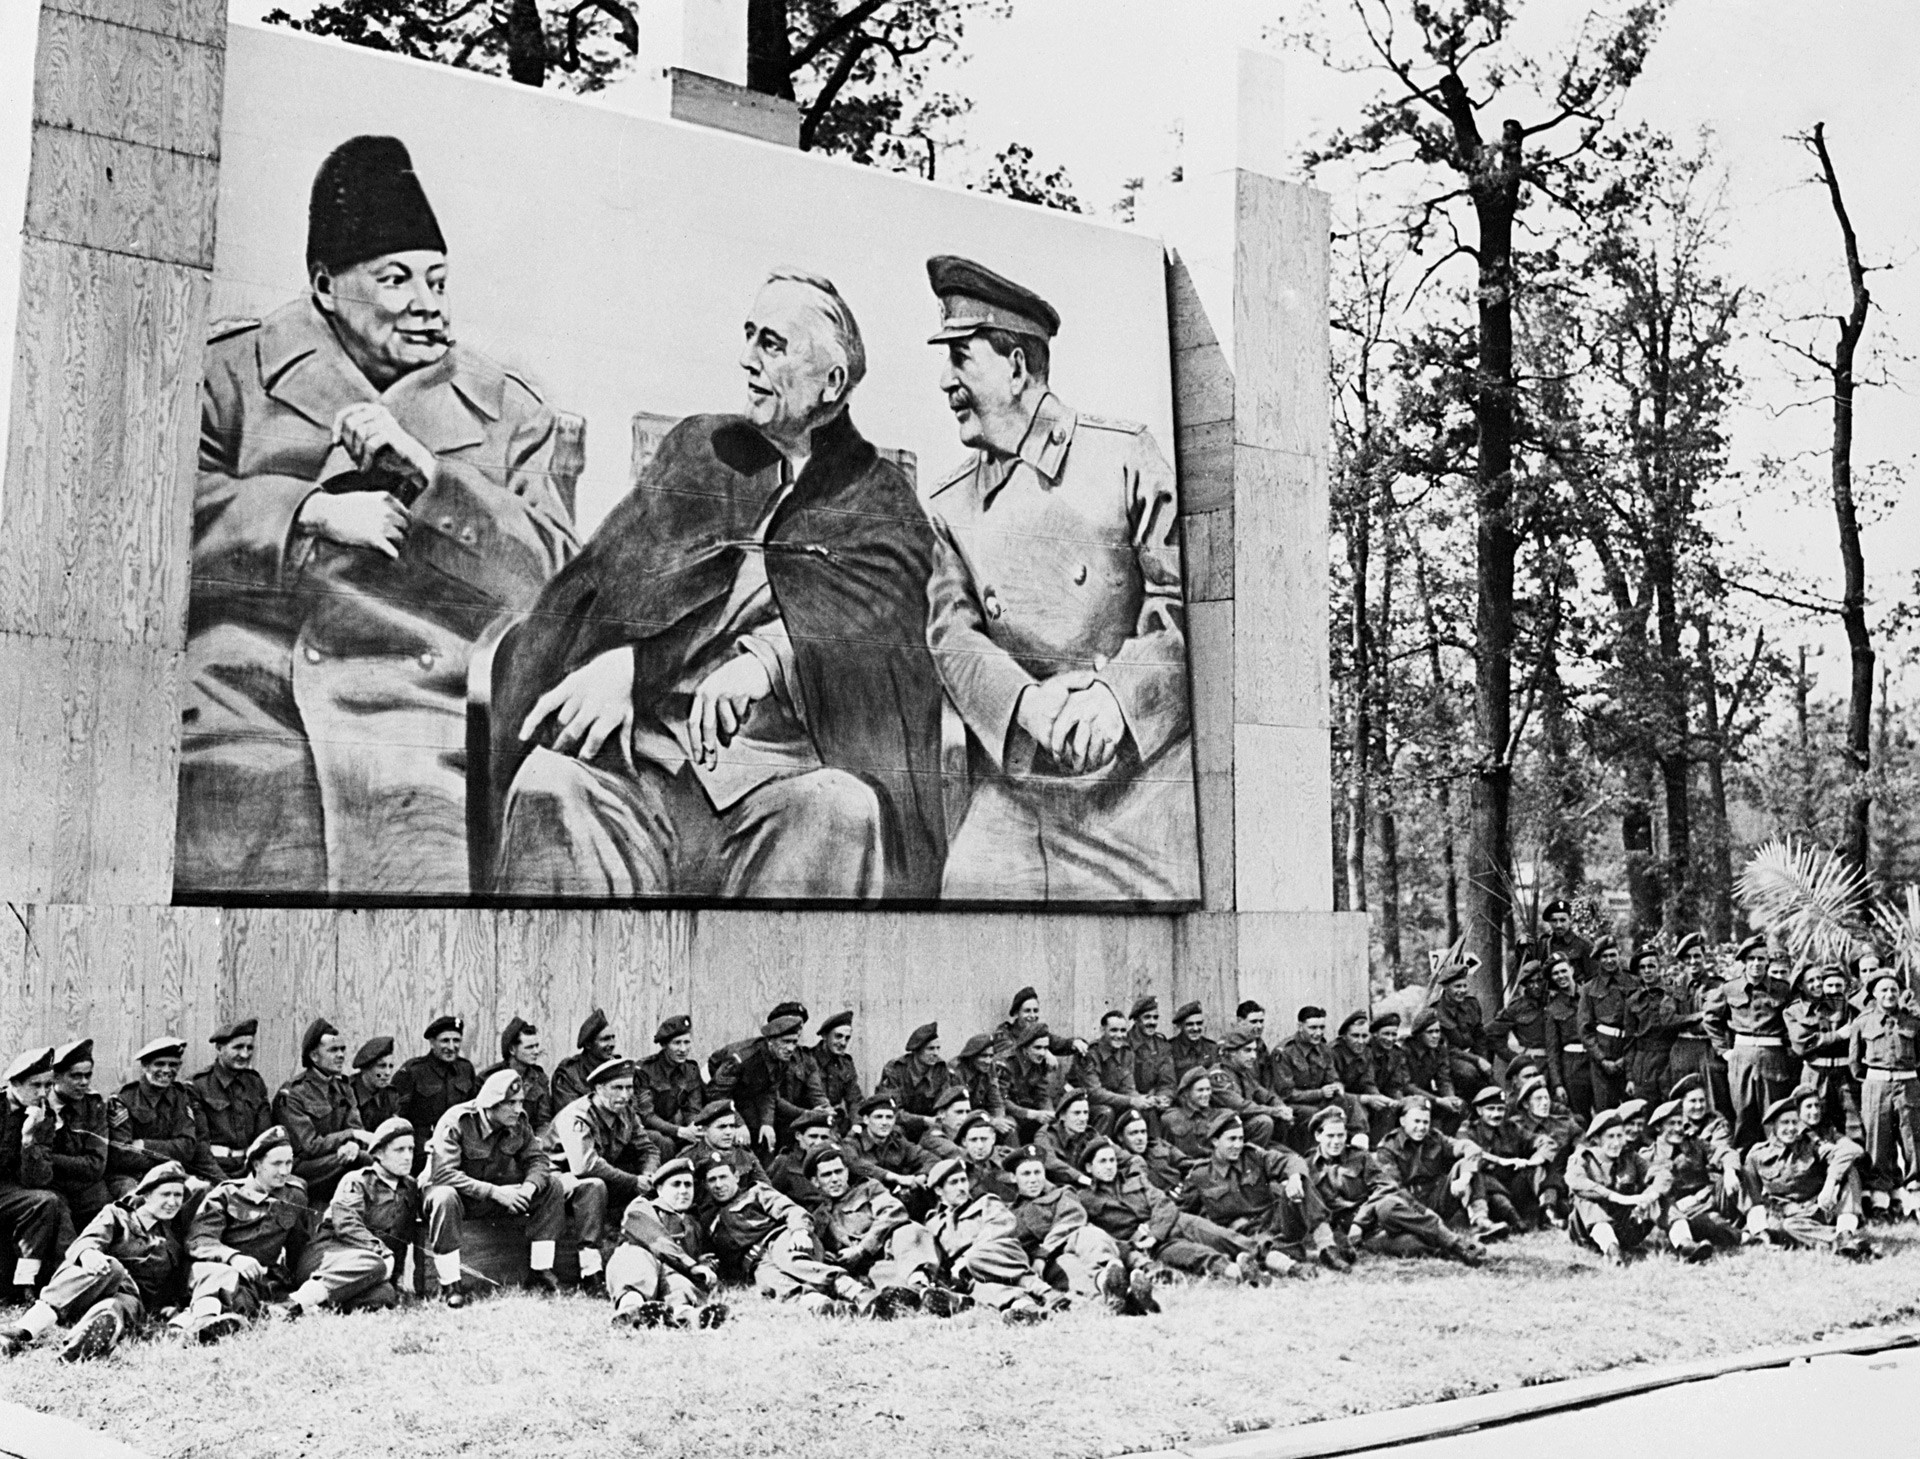 British troops taking part in an Allied Victory Parade in Berlin rest beneath a large poster of Churchill, Roosevelt, and Stalin at Yalta. Soon after winning the war, the relations between the Allies deteriorated all over again.